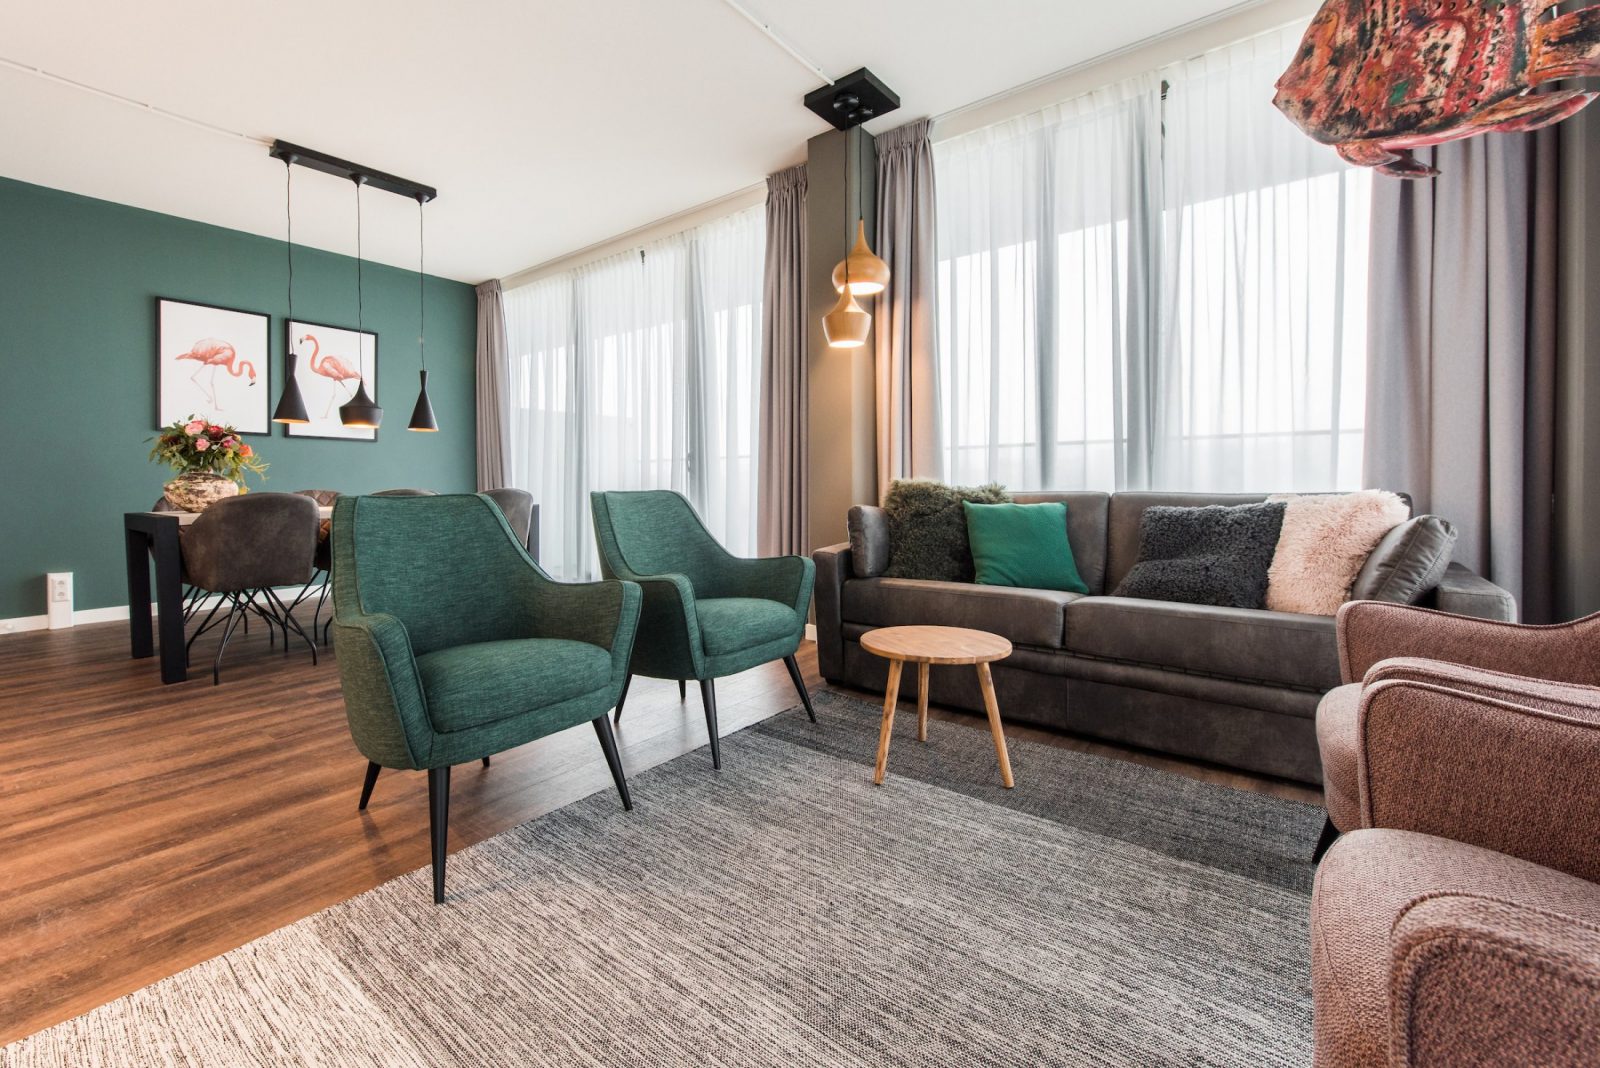 NDSM Serviced Apartments AMS Large Two bedroom living room